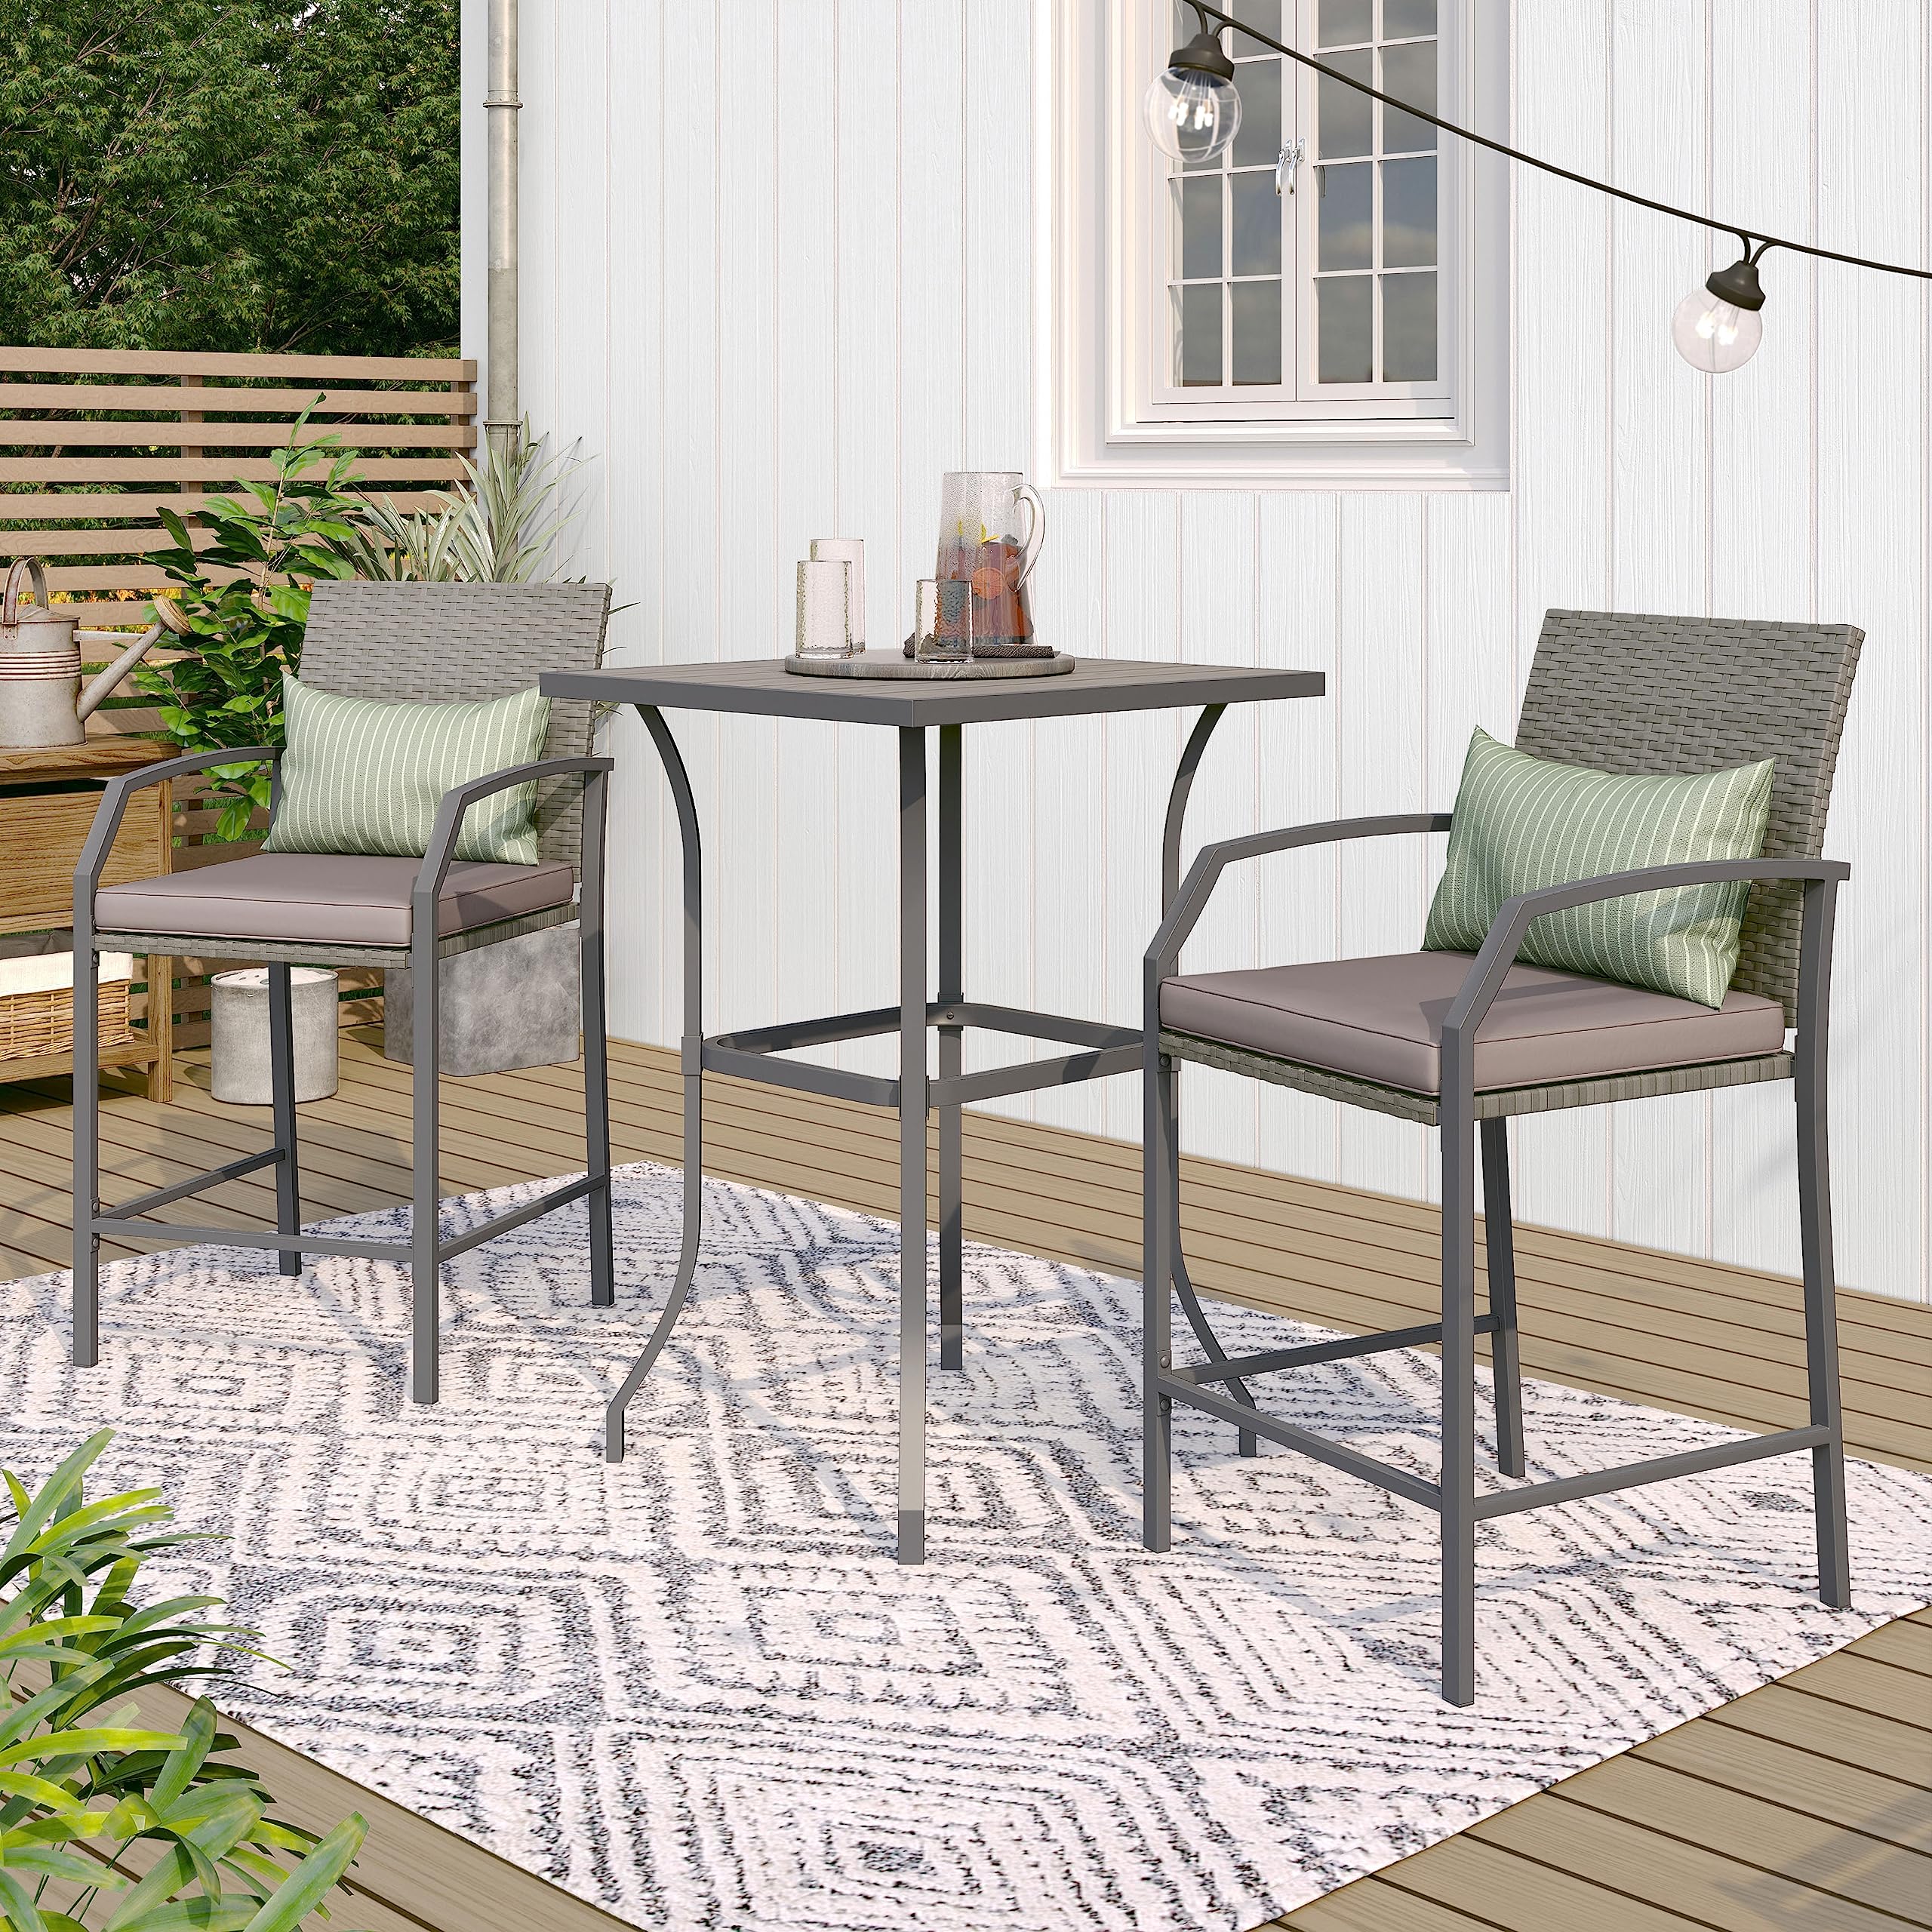 3pcs Outdoor Bar Height Bistro Set Square Coffee Table & Two Wicker Bar Stools